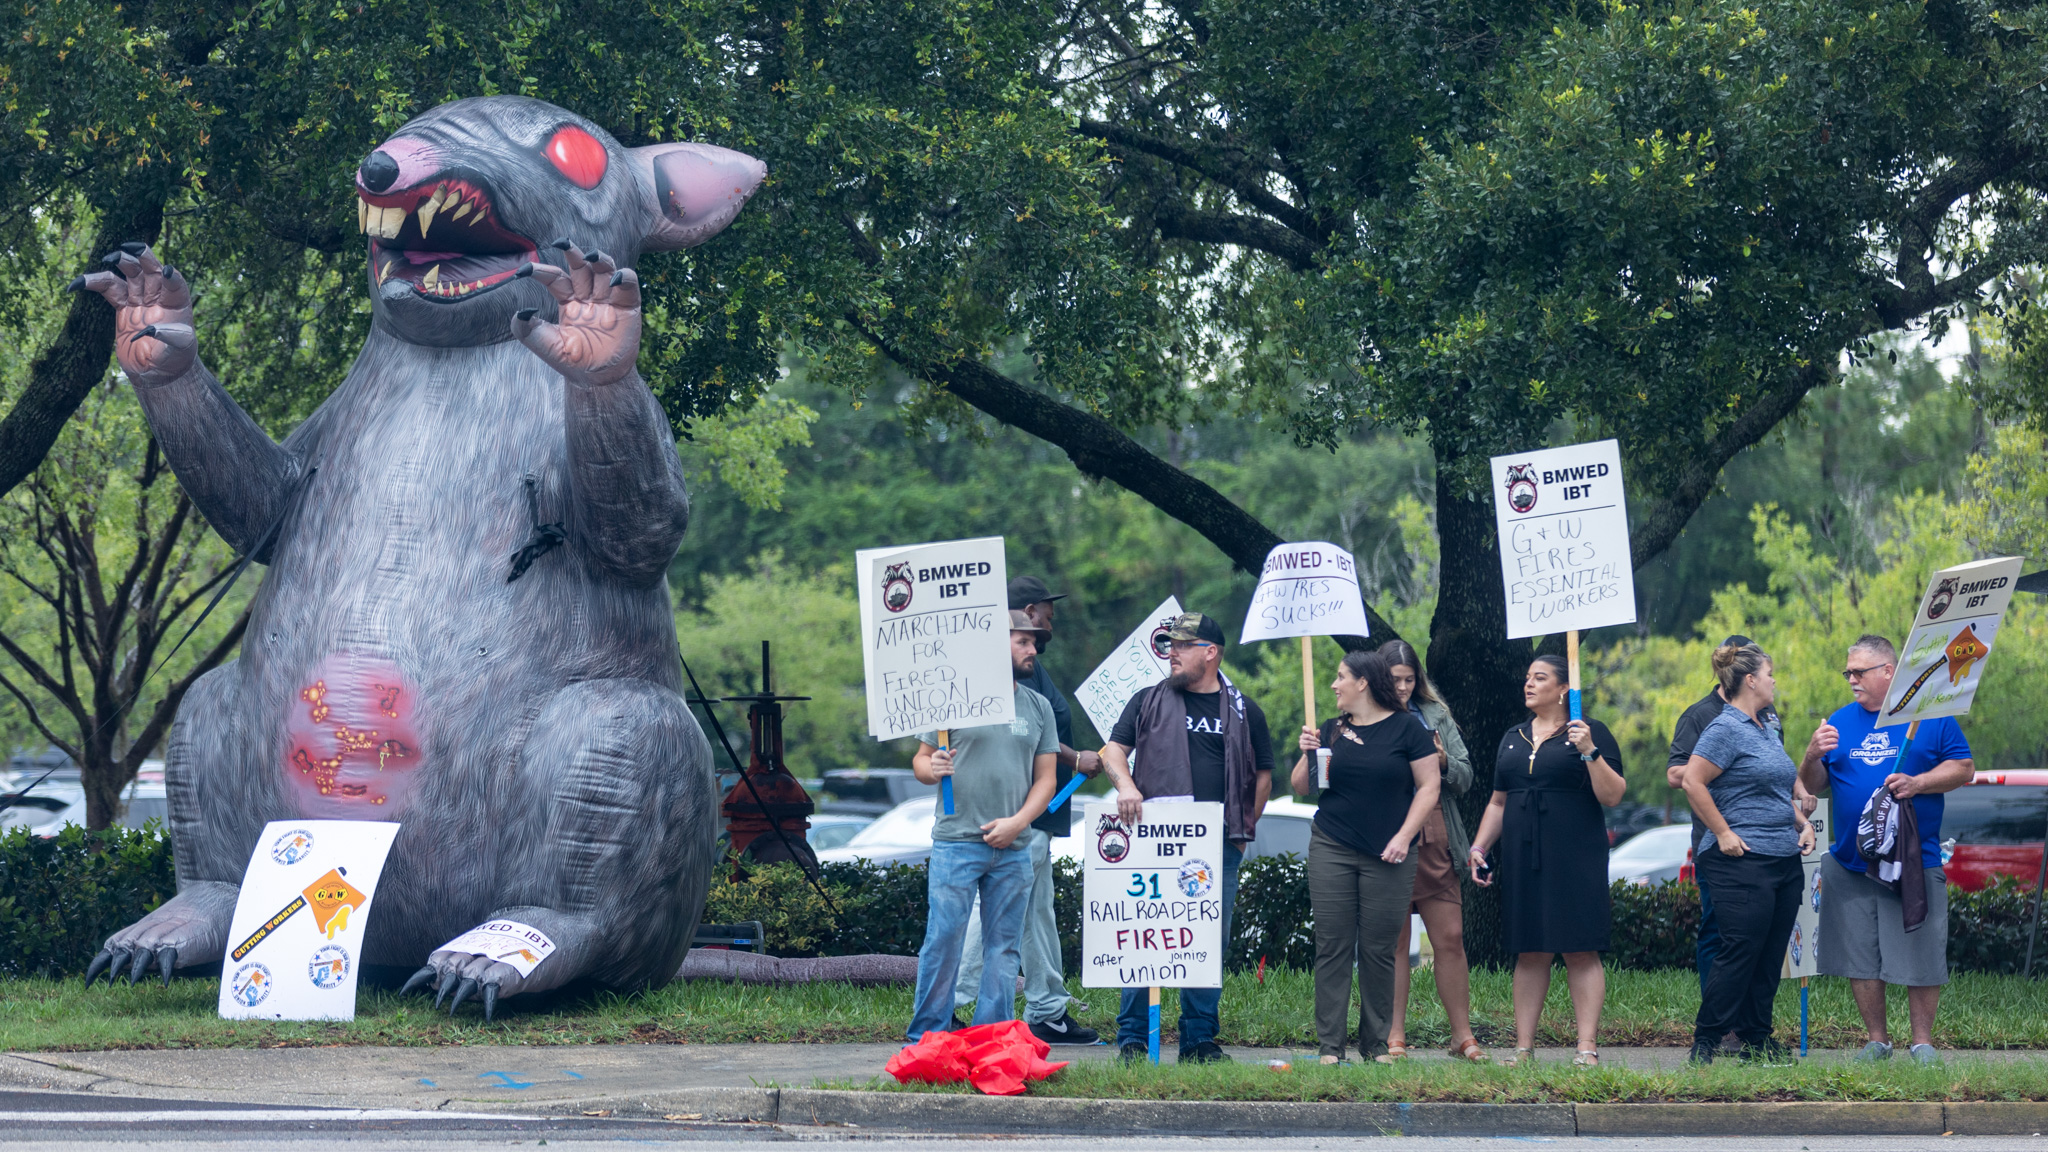 Featured image for “Teamsters demonstrate outside Jacksonville railroad accused of union busting”